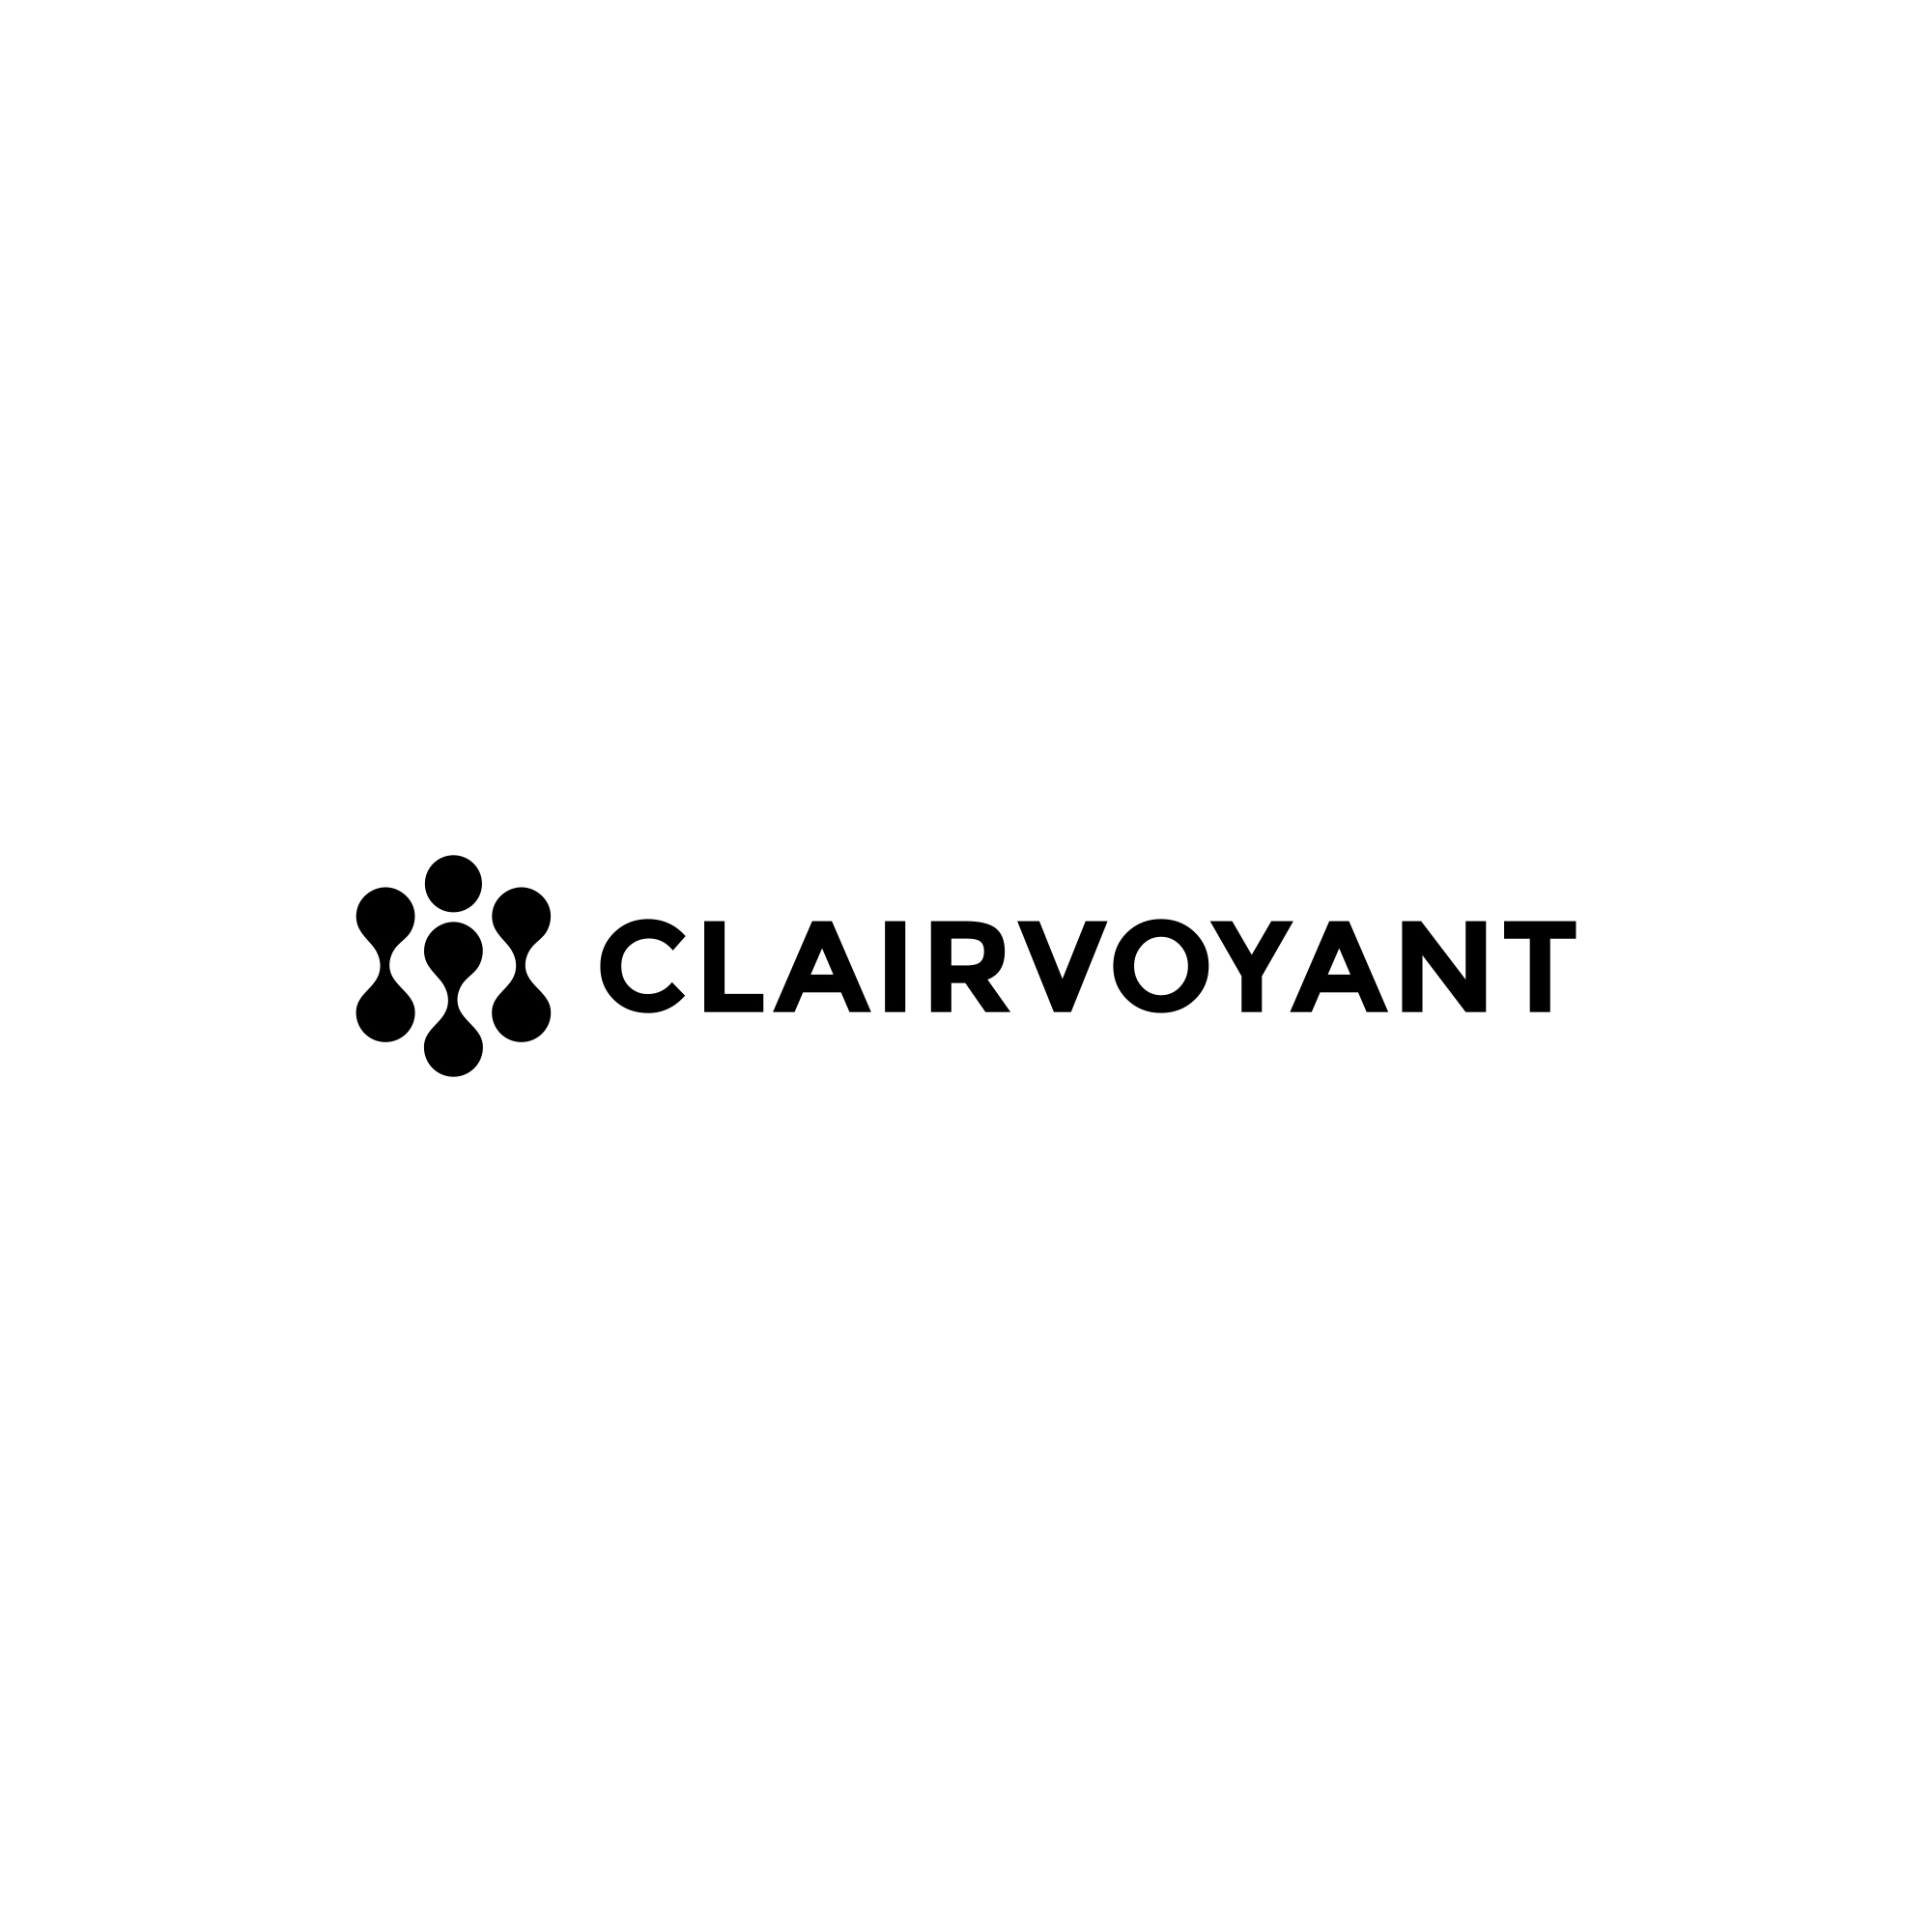 Clairvoyant's Phase 2 Psilocybin Therapy Trial for Alcohol Use Disorder Obtains Regulatory Approval and Initiates 1st Clinical Site in Finland